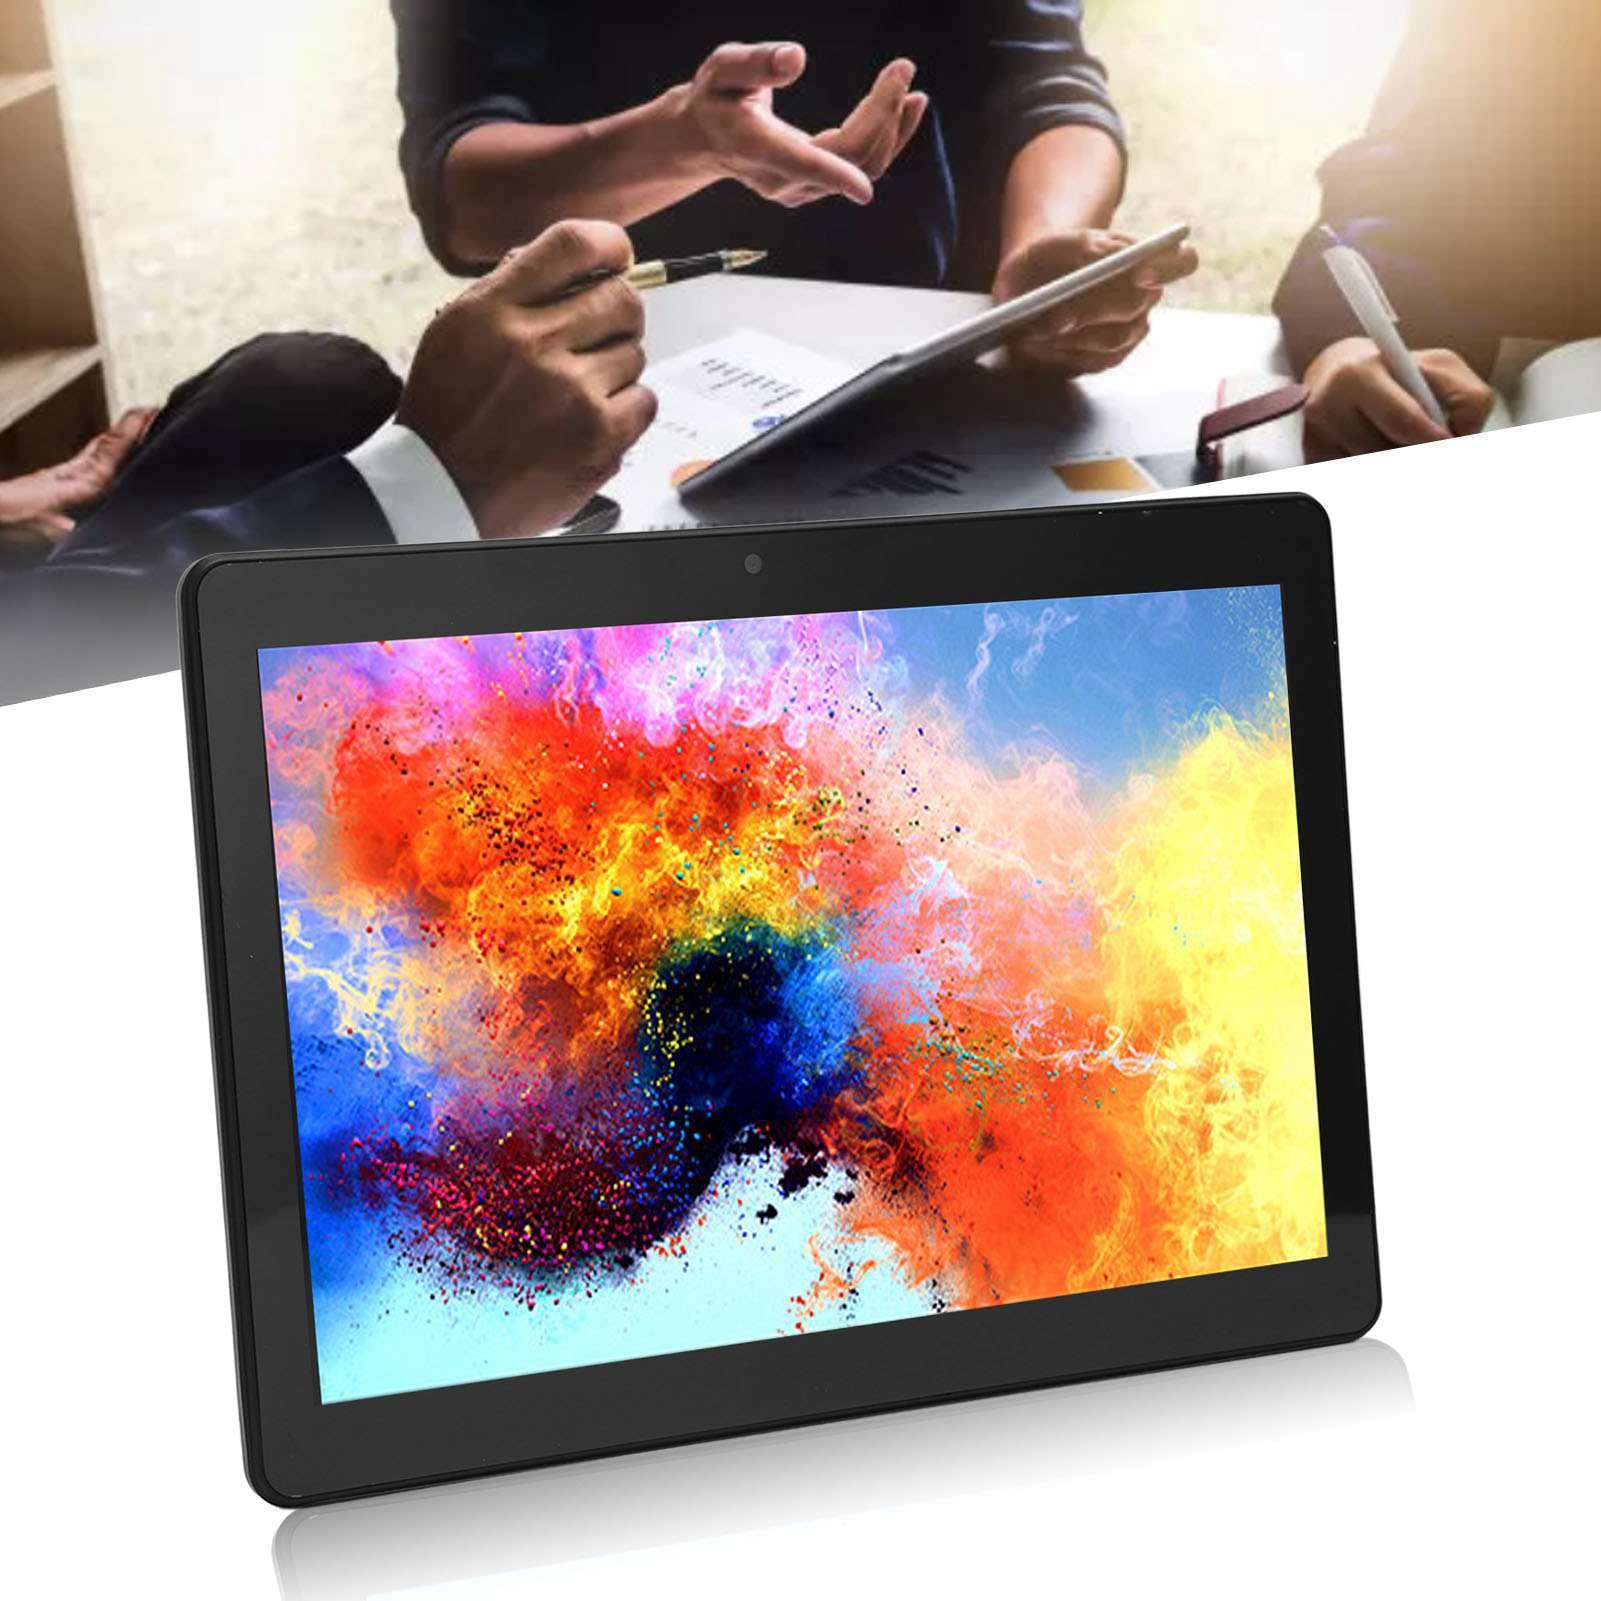 10 Inch Tablet, 1960X1080 IPS HD Touch Screen, 2 and 32GB Memory, Octa Core Processor, Front 2 MP and Rear 5 MP Cameras, Calling Tablet for Android 11 OS(USA)